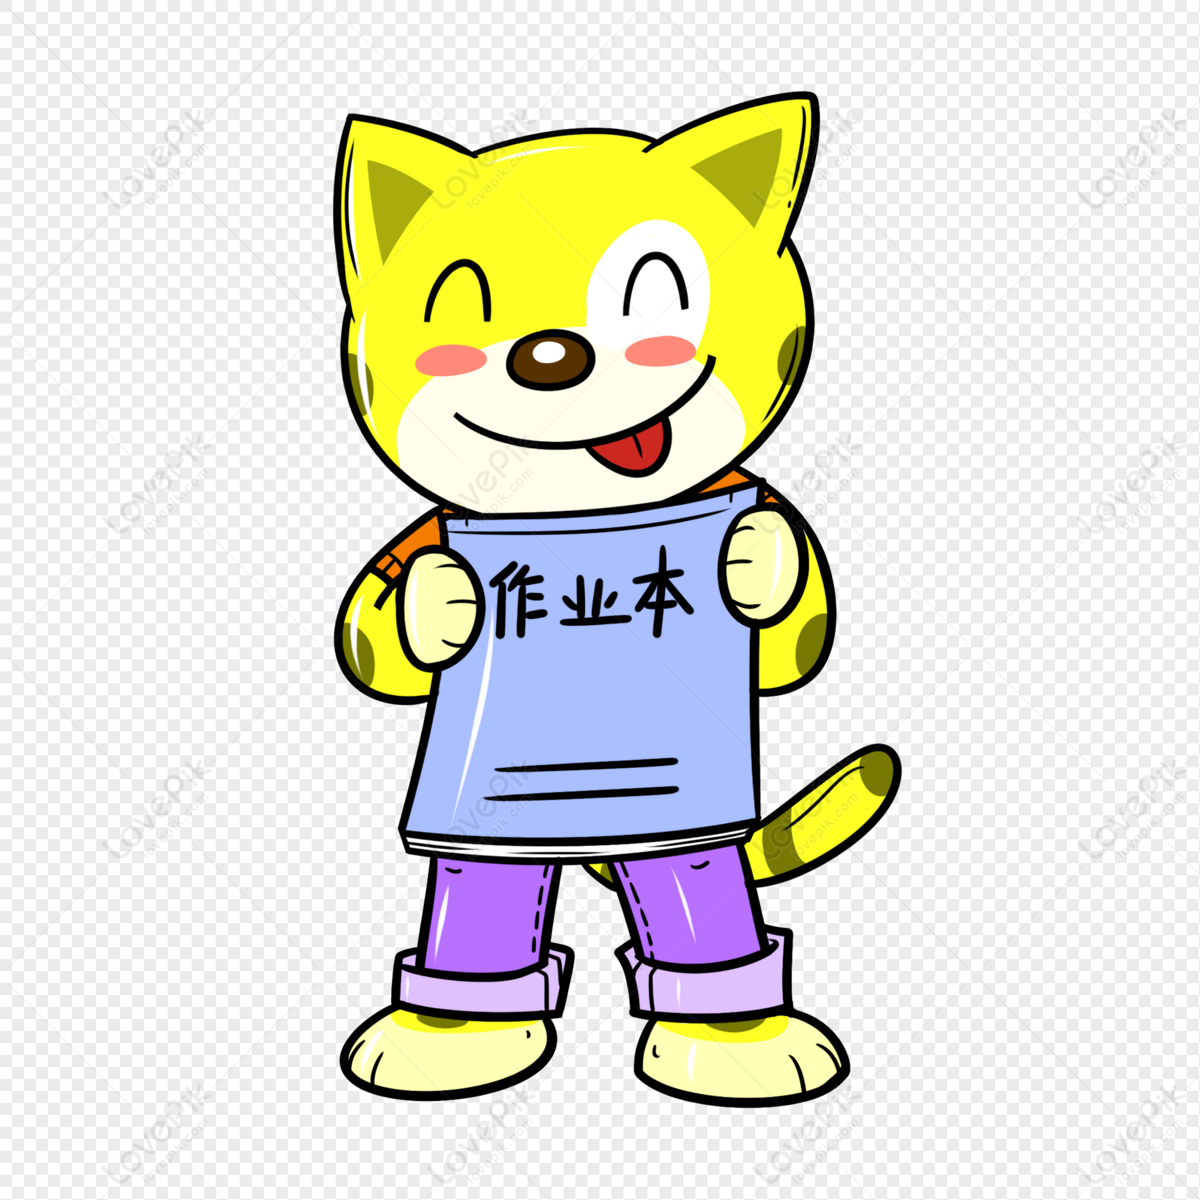 Small yellow cat and homework book, kittens, small book, and homework png white transparent